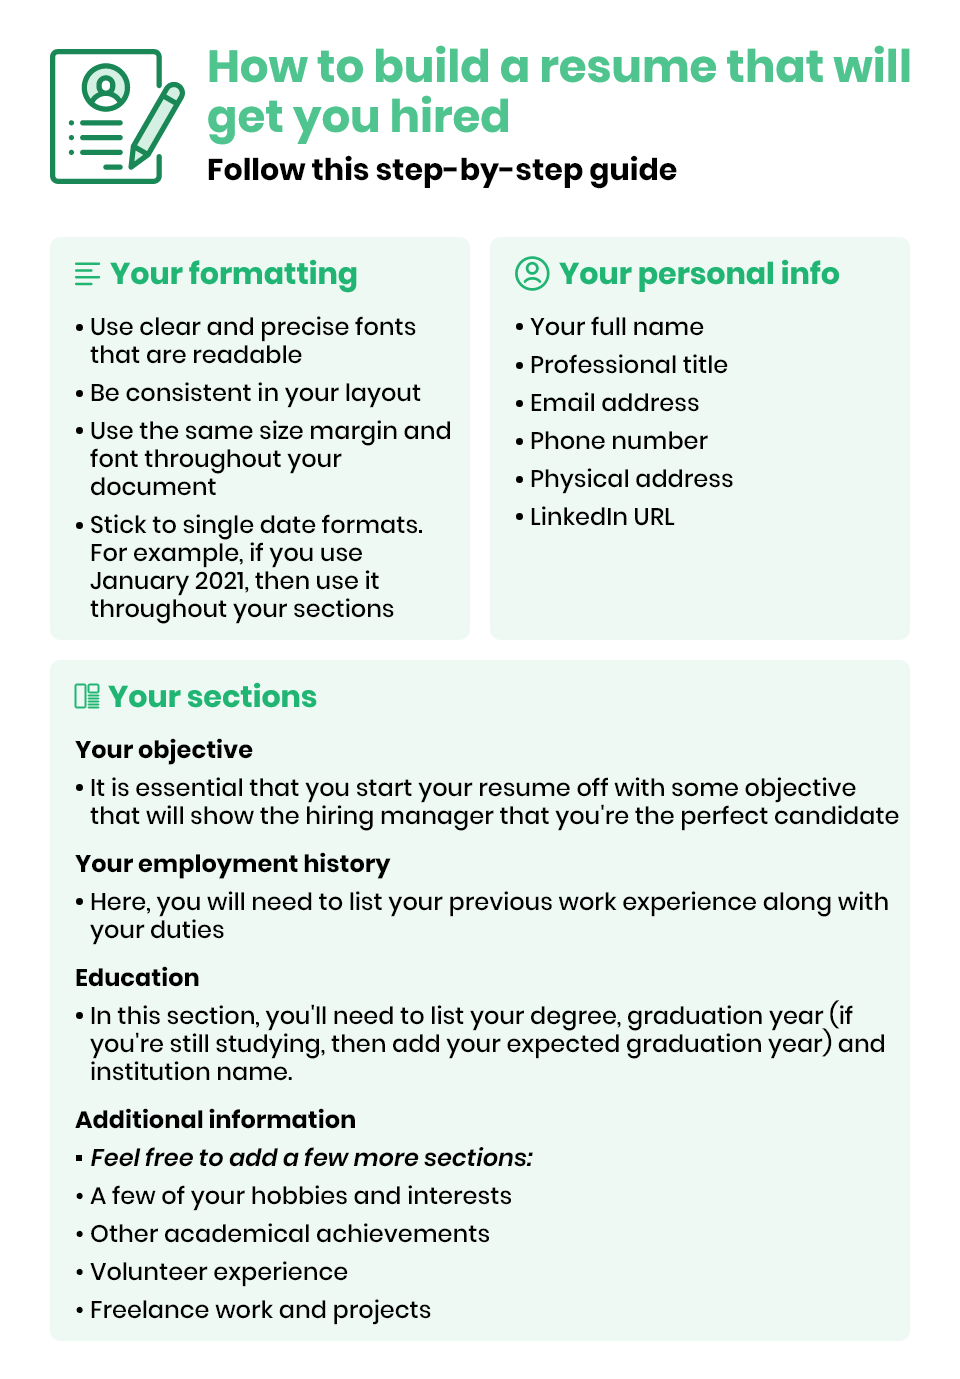 How to build a resume guide